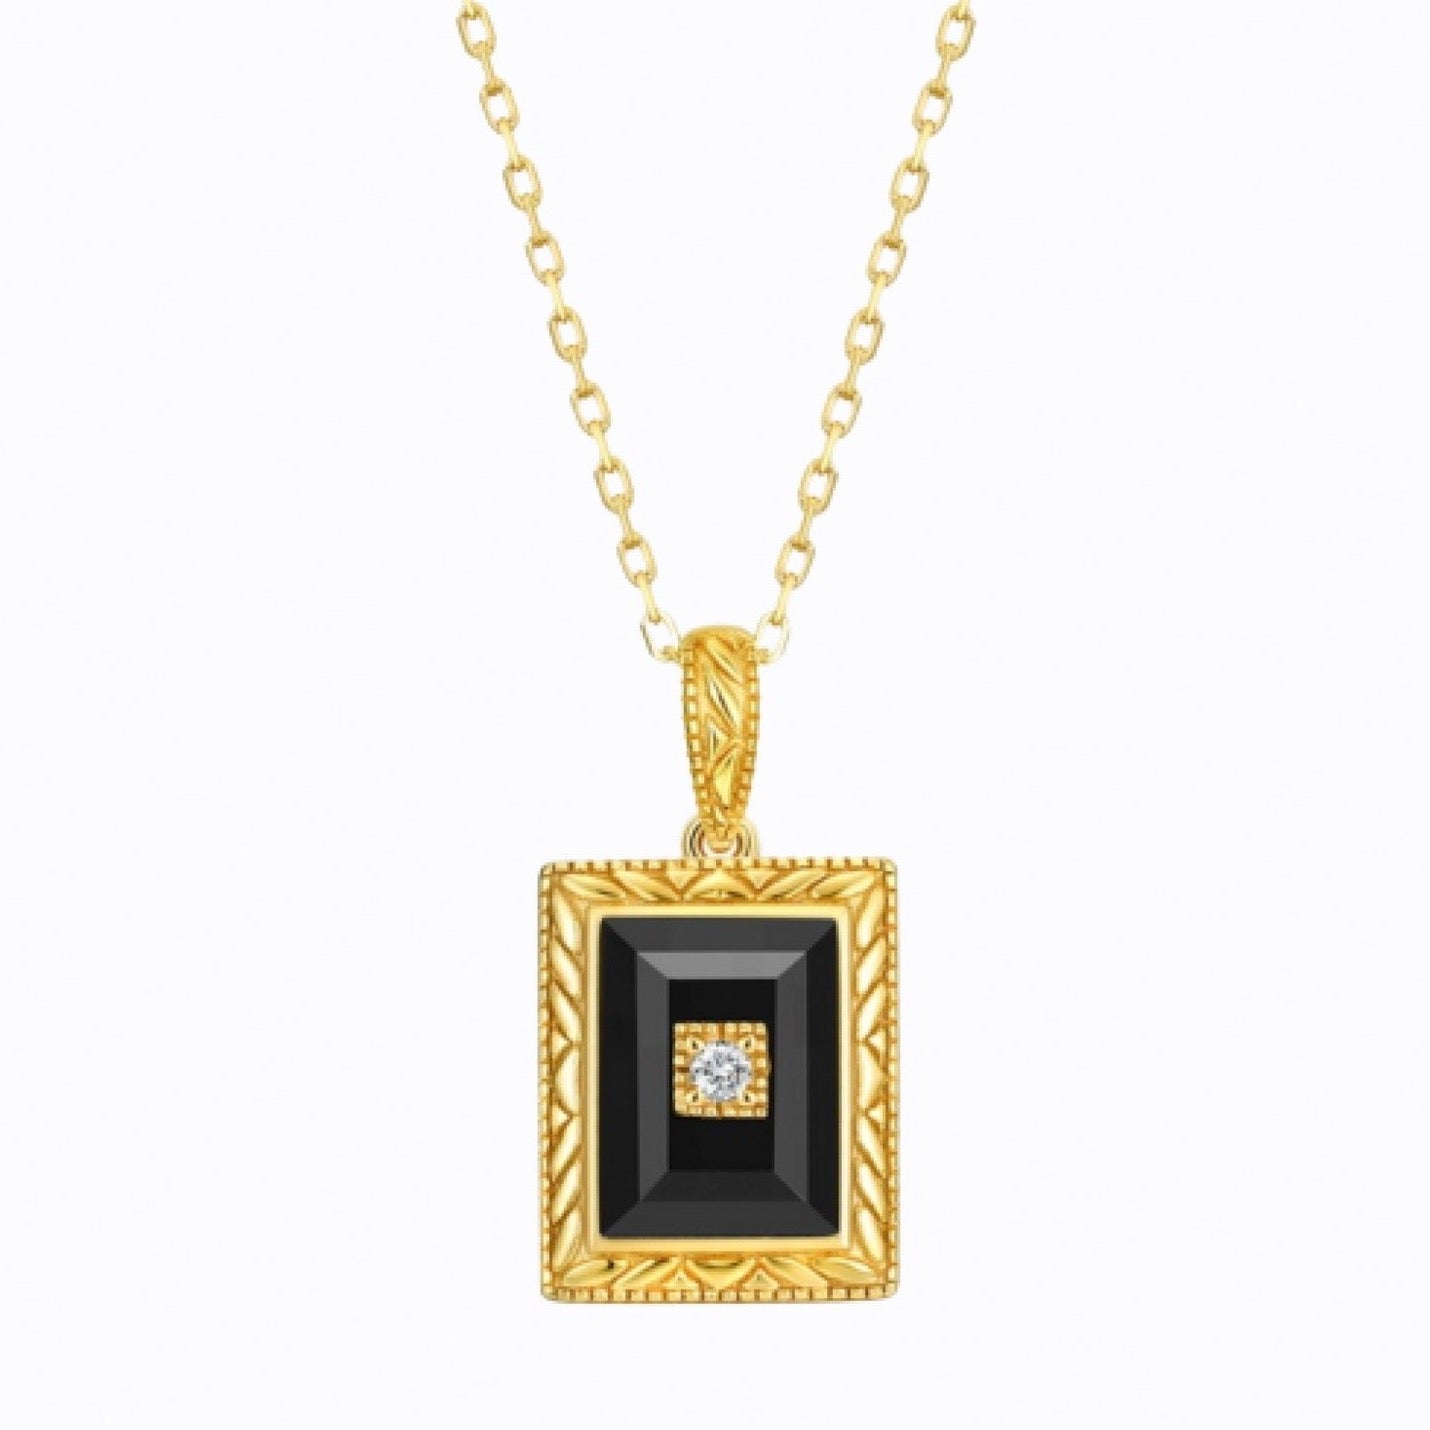 Black and Gold Agate Square Statement Pendant Necklace